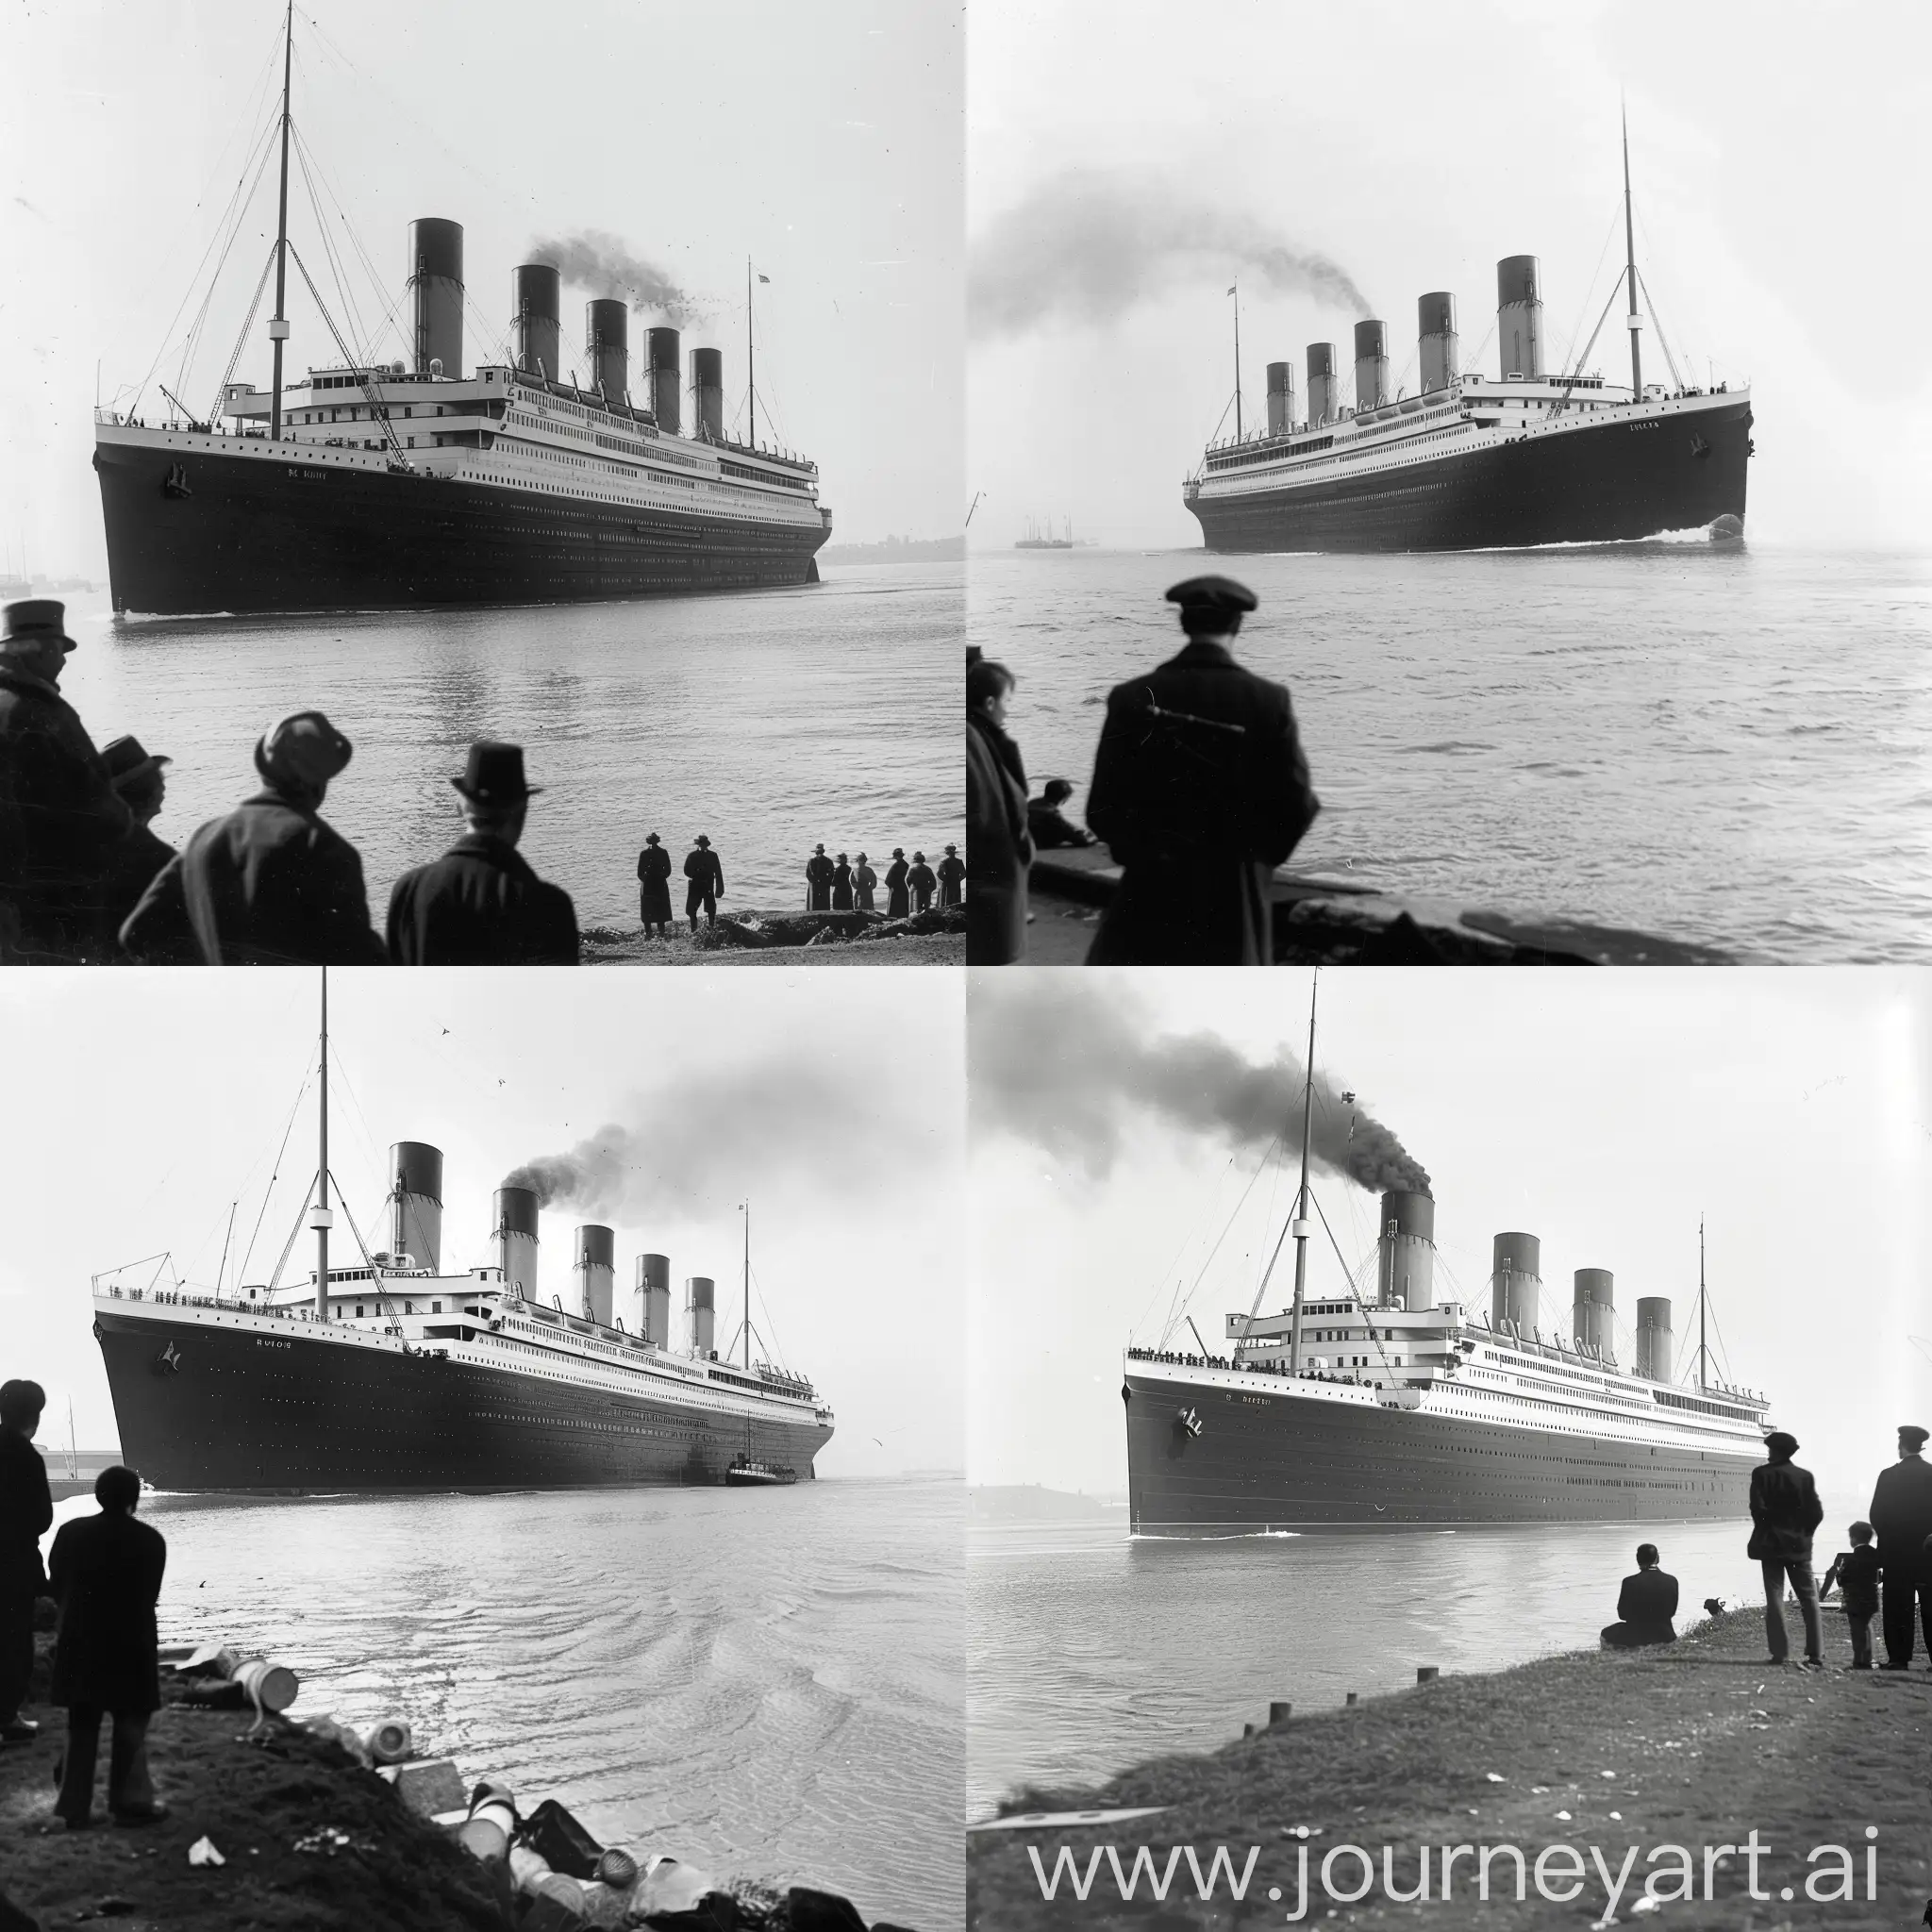 The British liner RMS Titanic, leaving southampton on its maiden voyage, a few people watching, clean day time sky, photograph, side view, profile pic of the ship, the ship only has 4 funnels